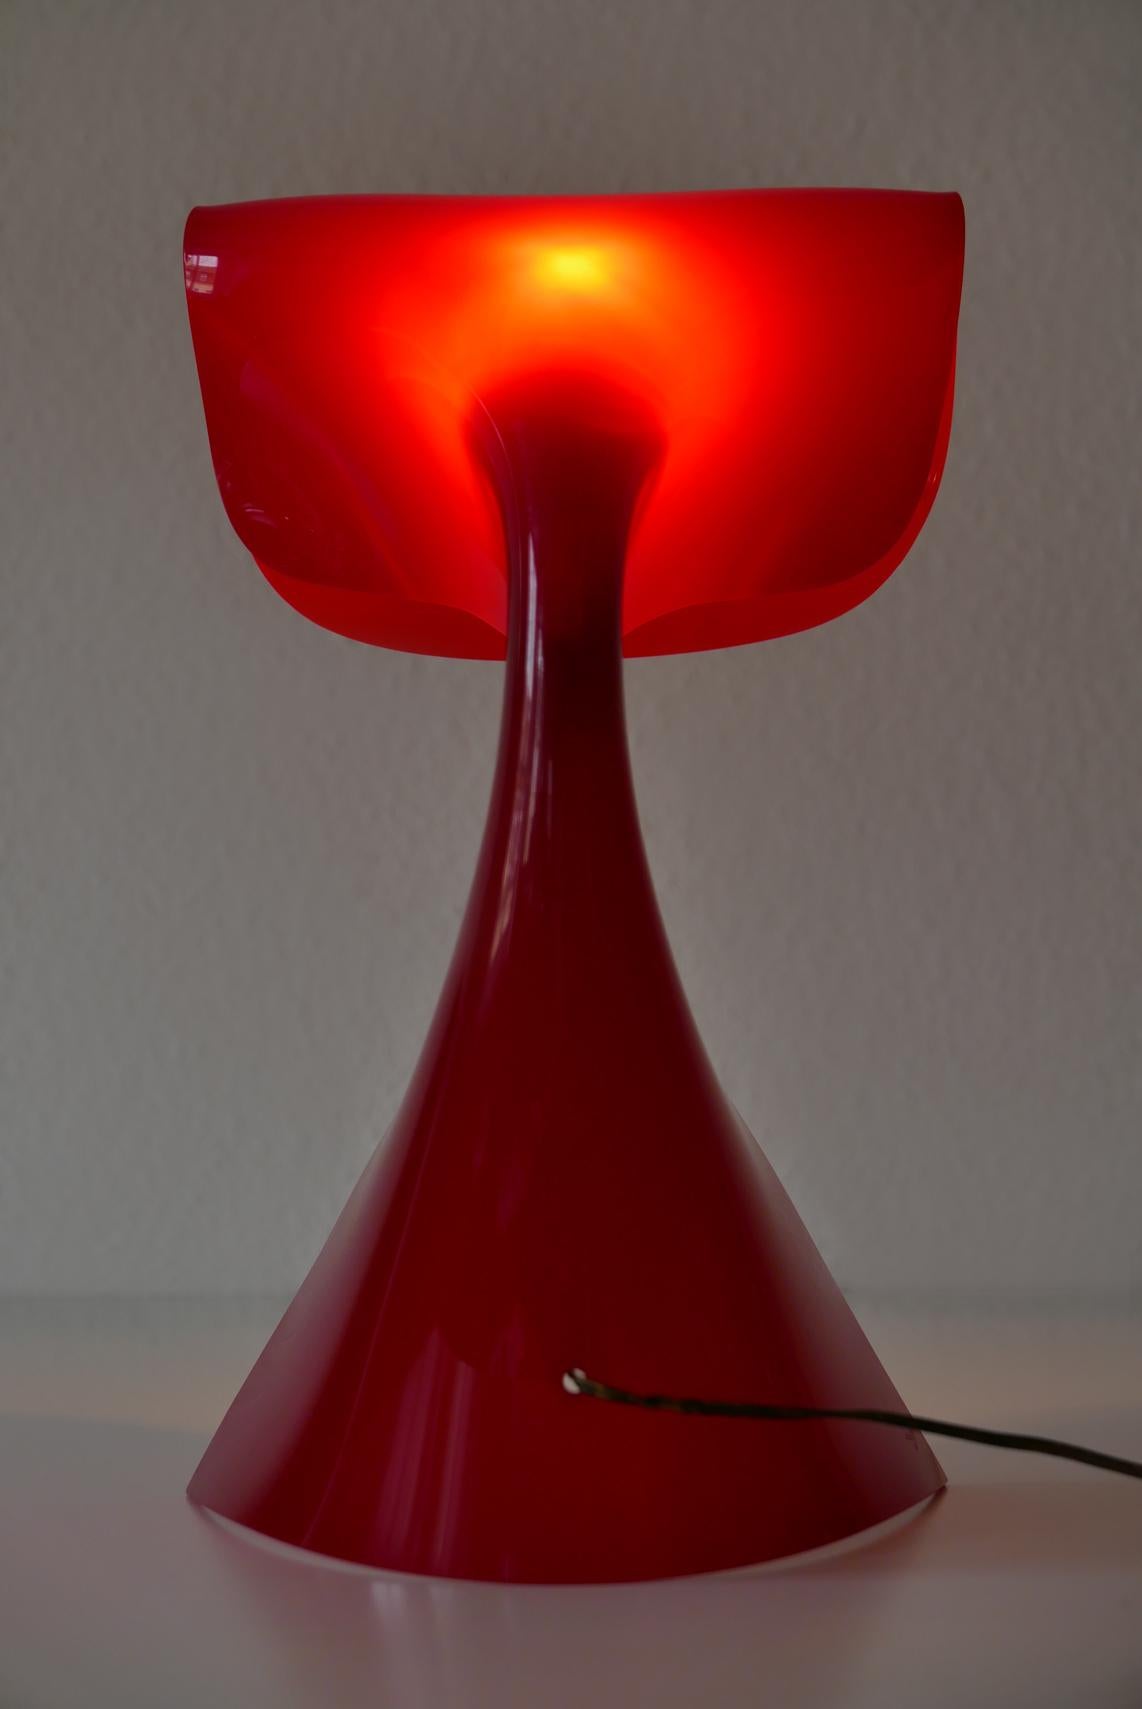 Exceptional Table Lamp by Hanns Hoffmann-Lederer for Heinz Hecht, 1950s, Germany For Sale 9